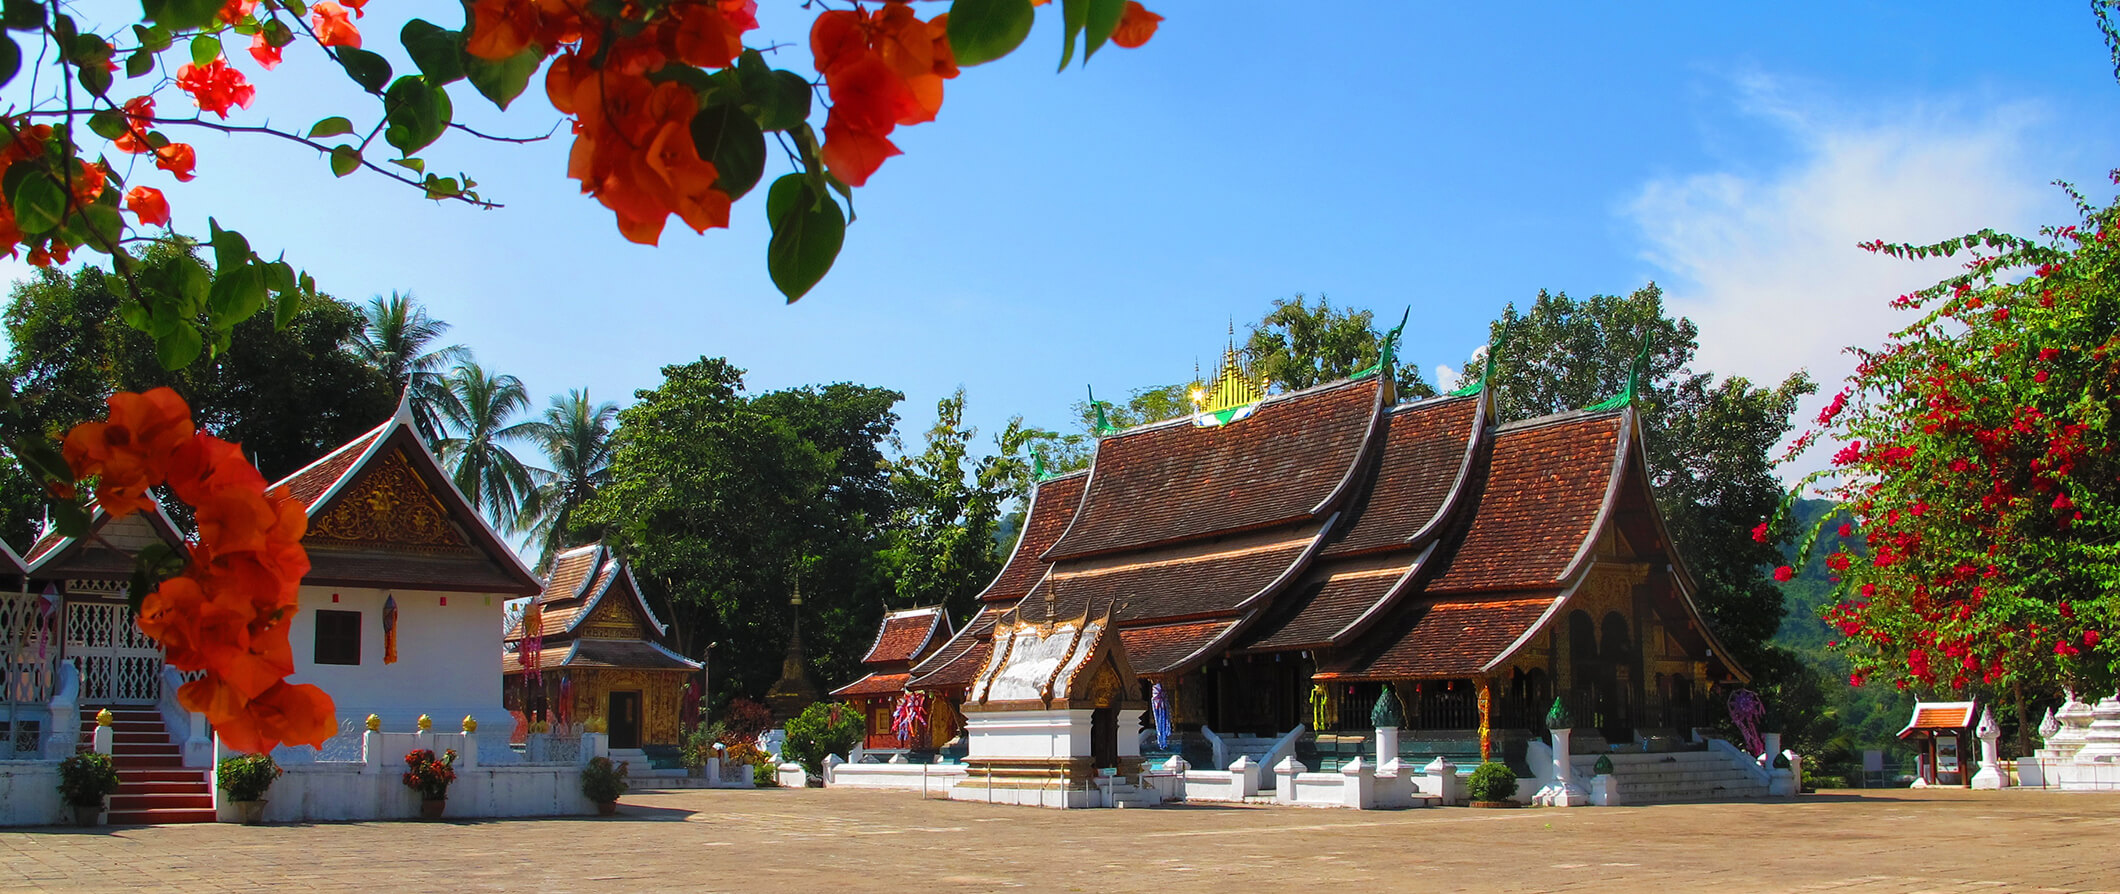 Traditional houses in Luang, Laos